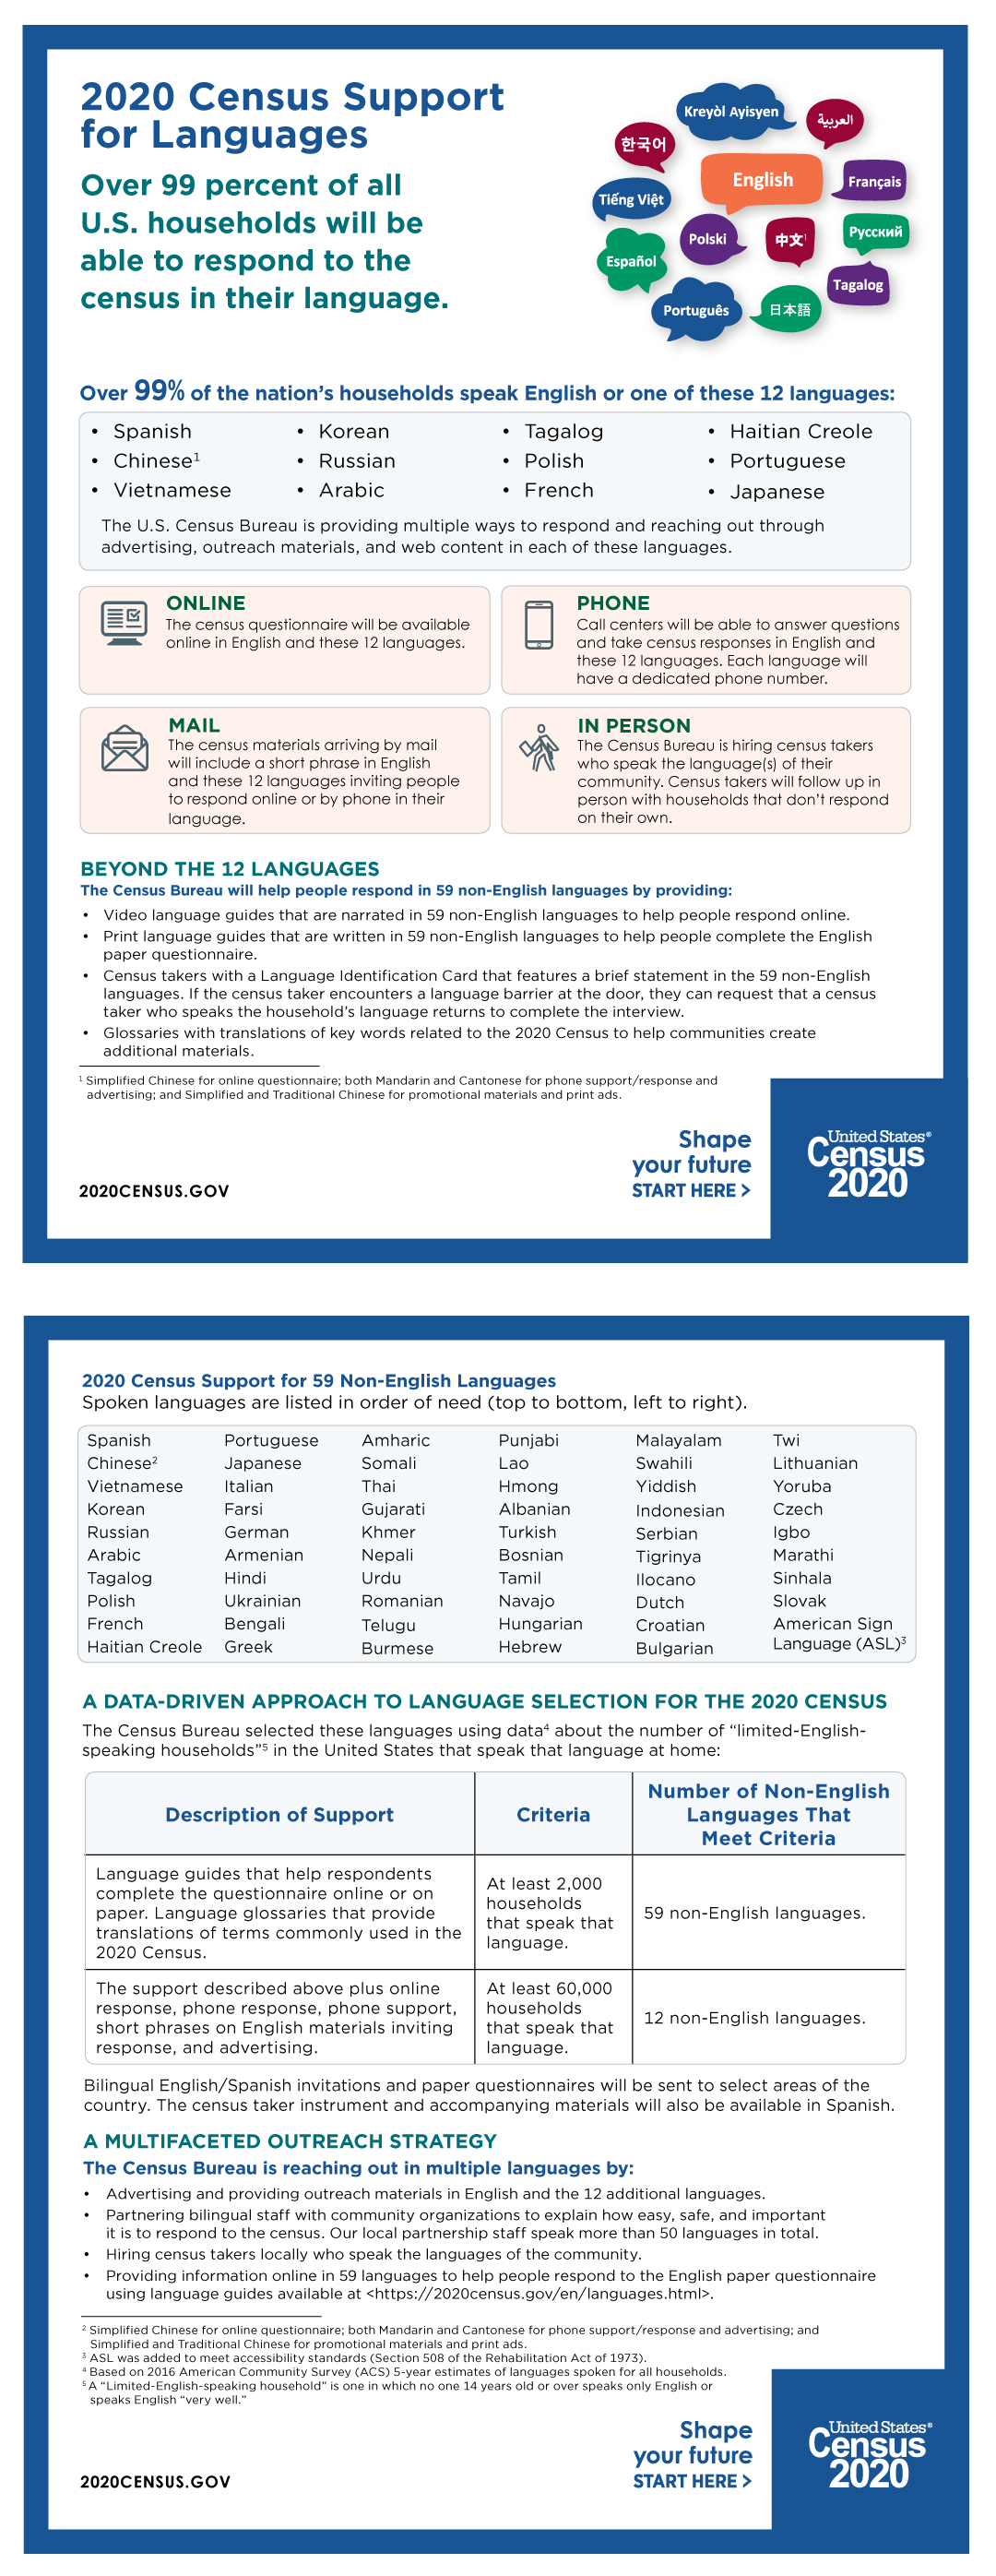 2020 Census Support for Languages